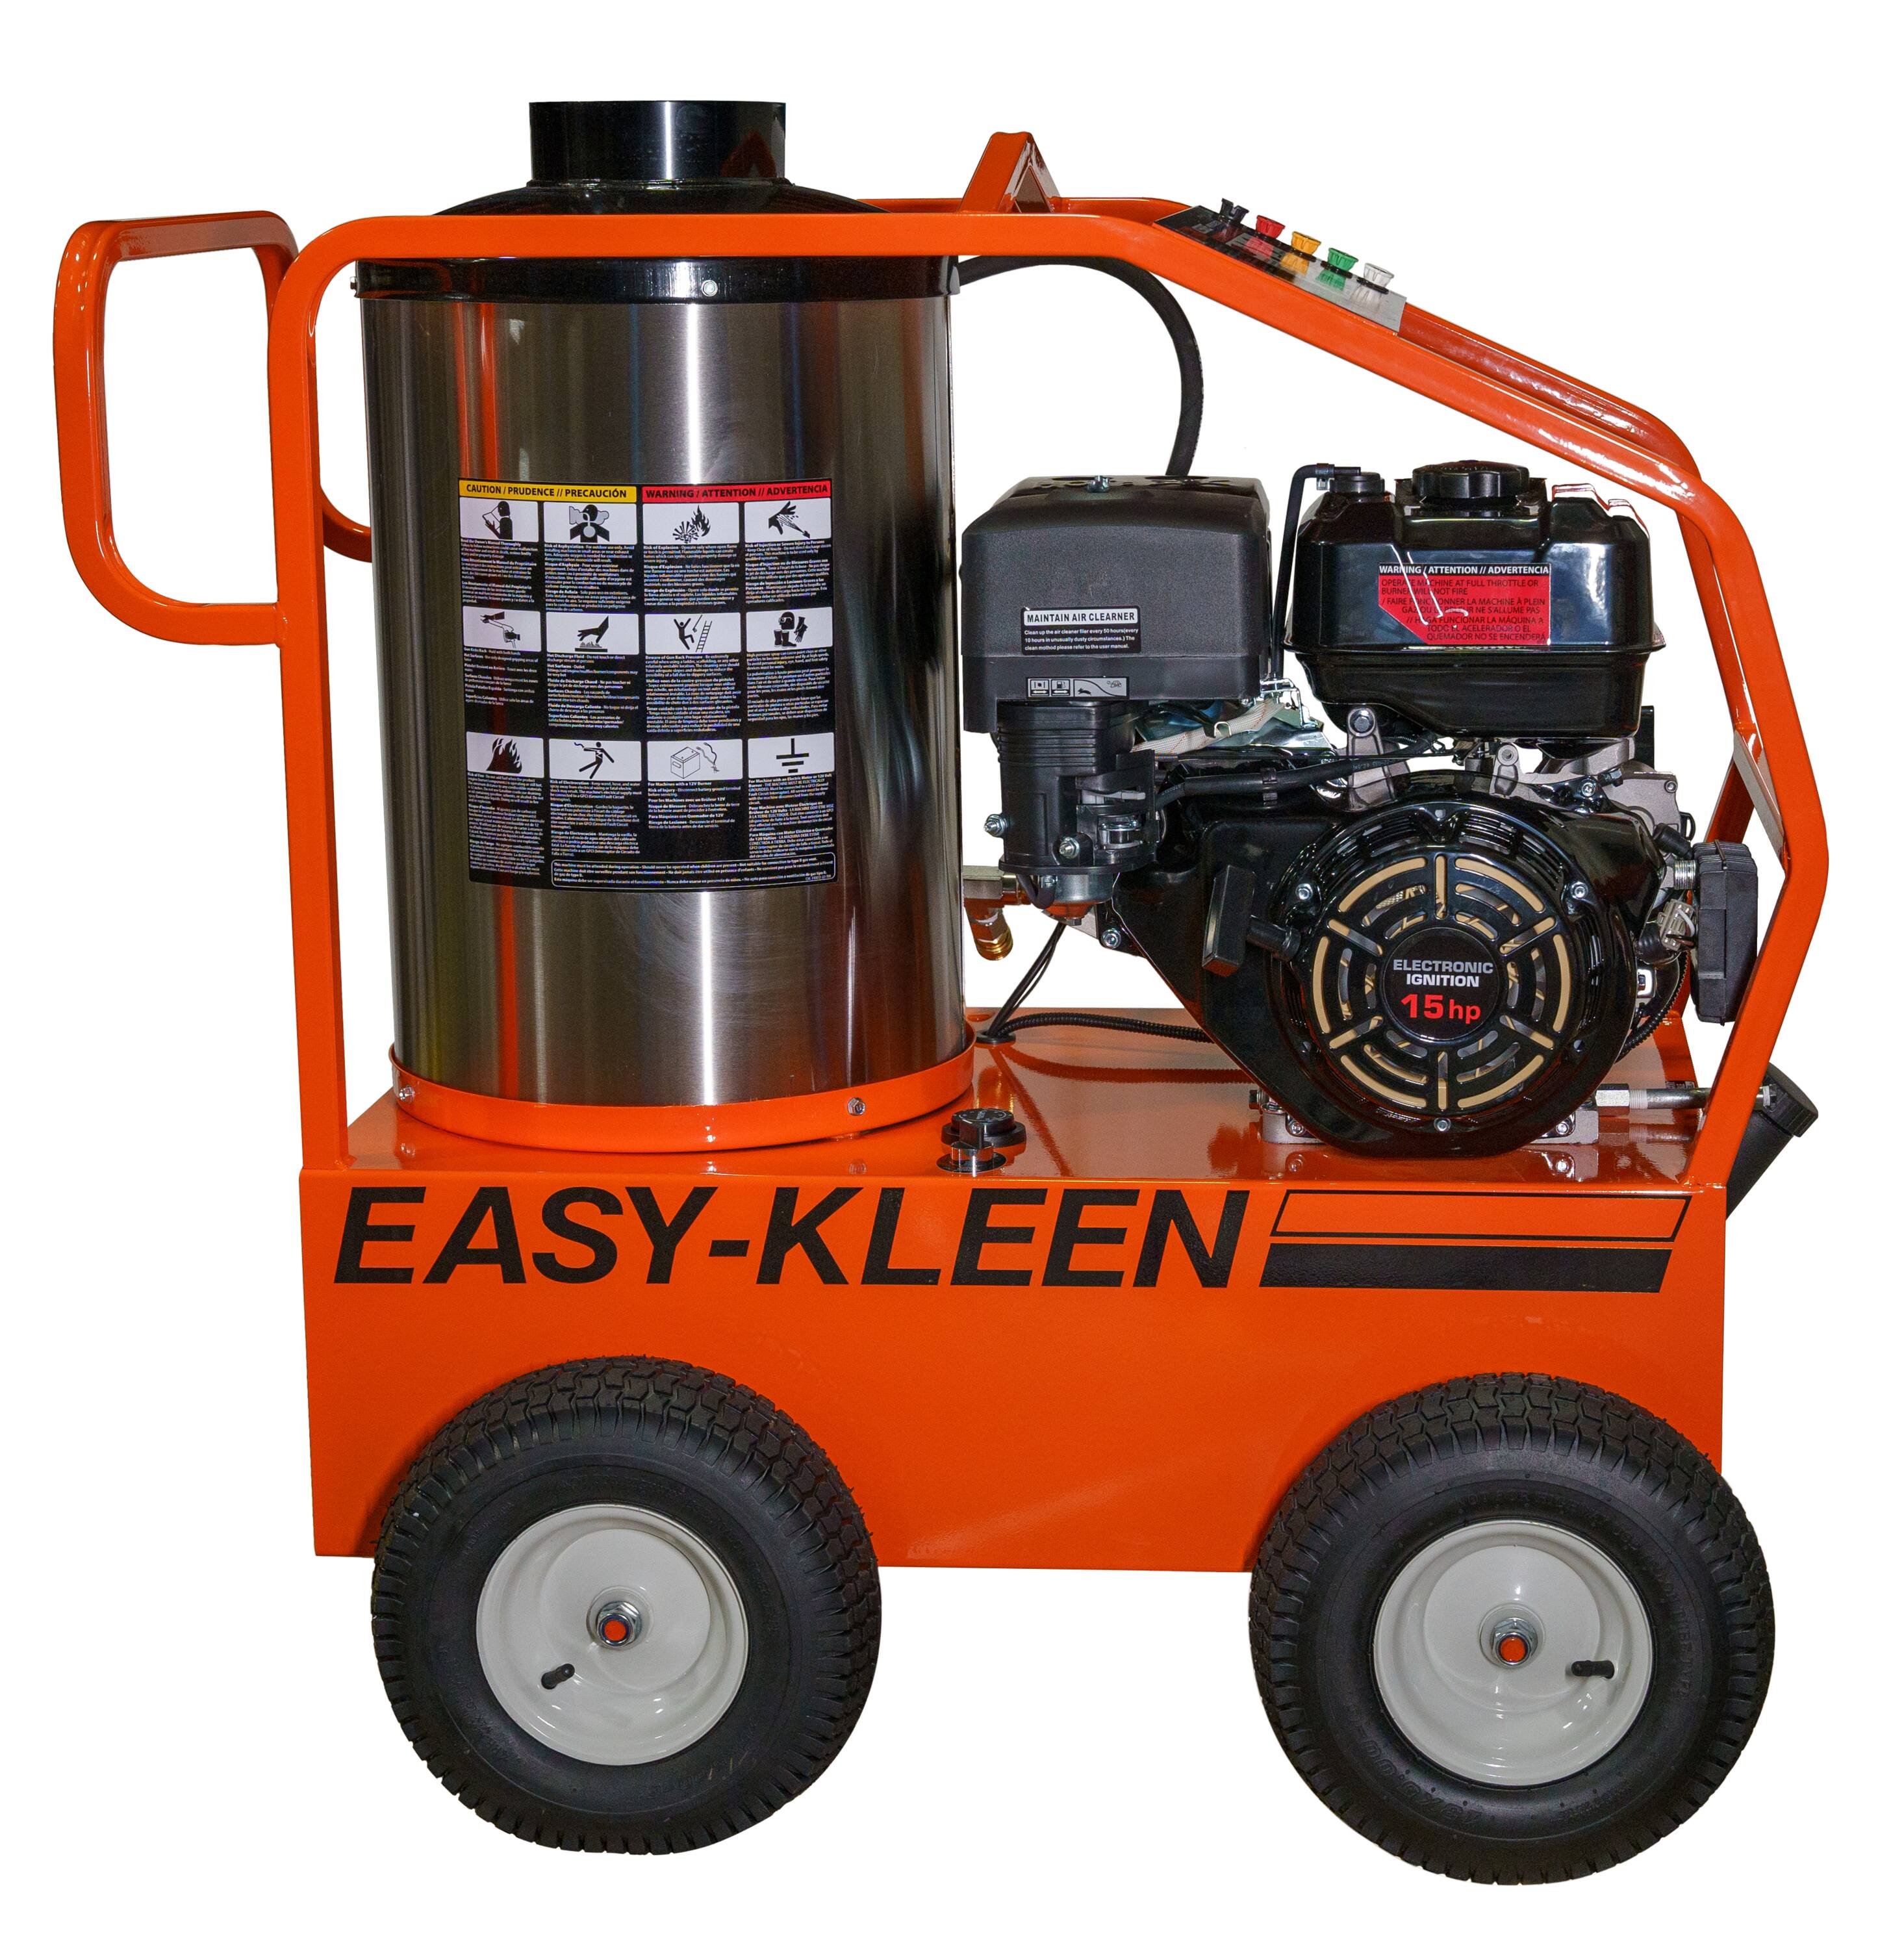 Pressure Washer Commercial Hot Water Electric - Oil Fired - 3.5GPM